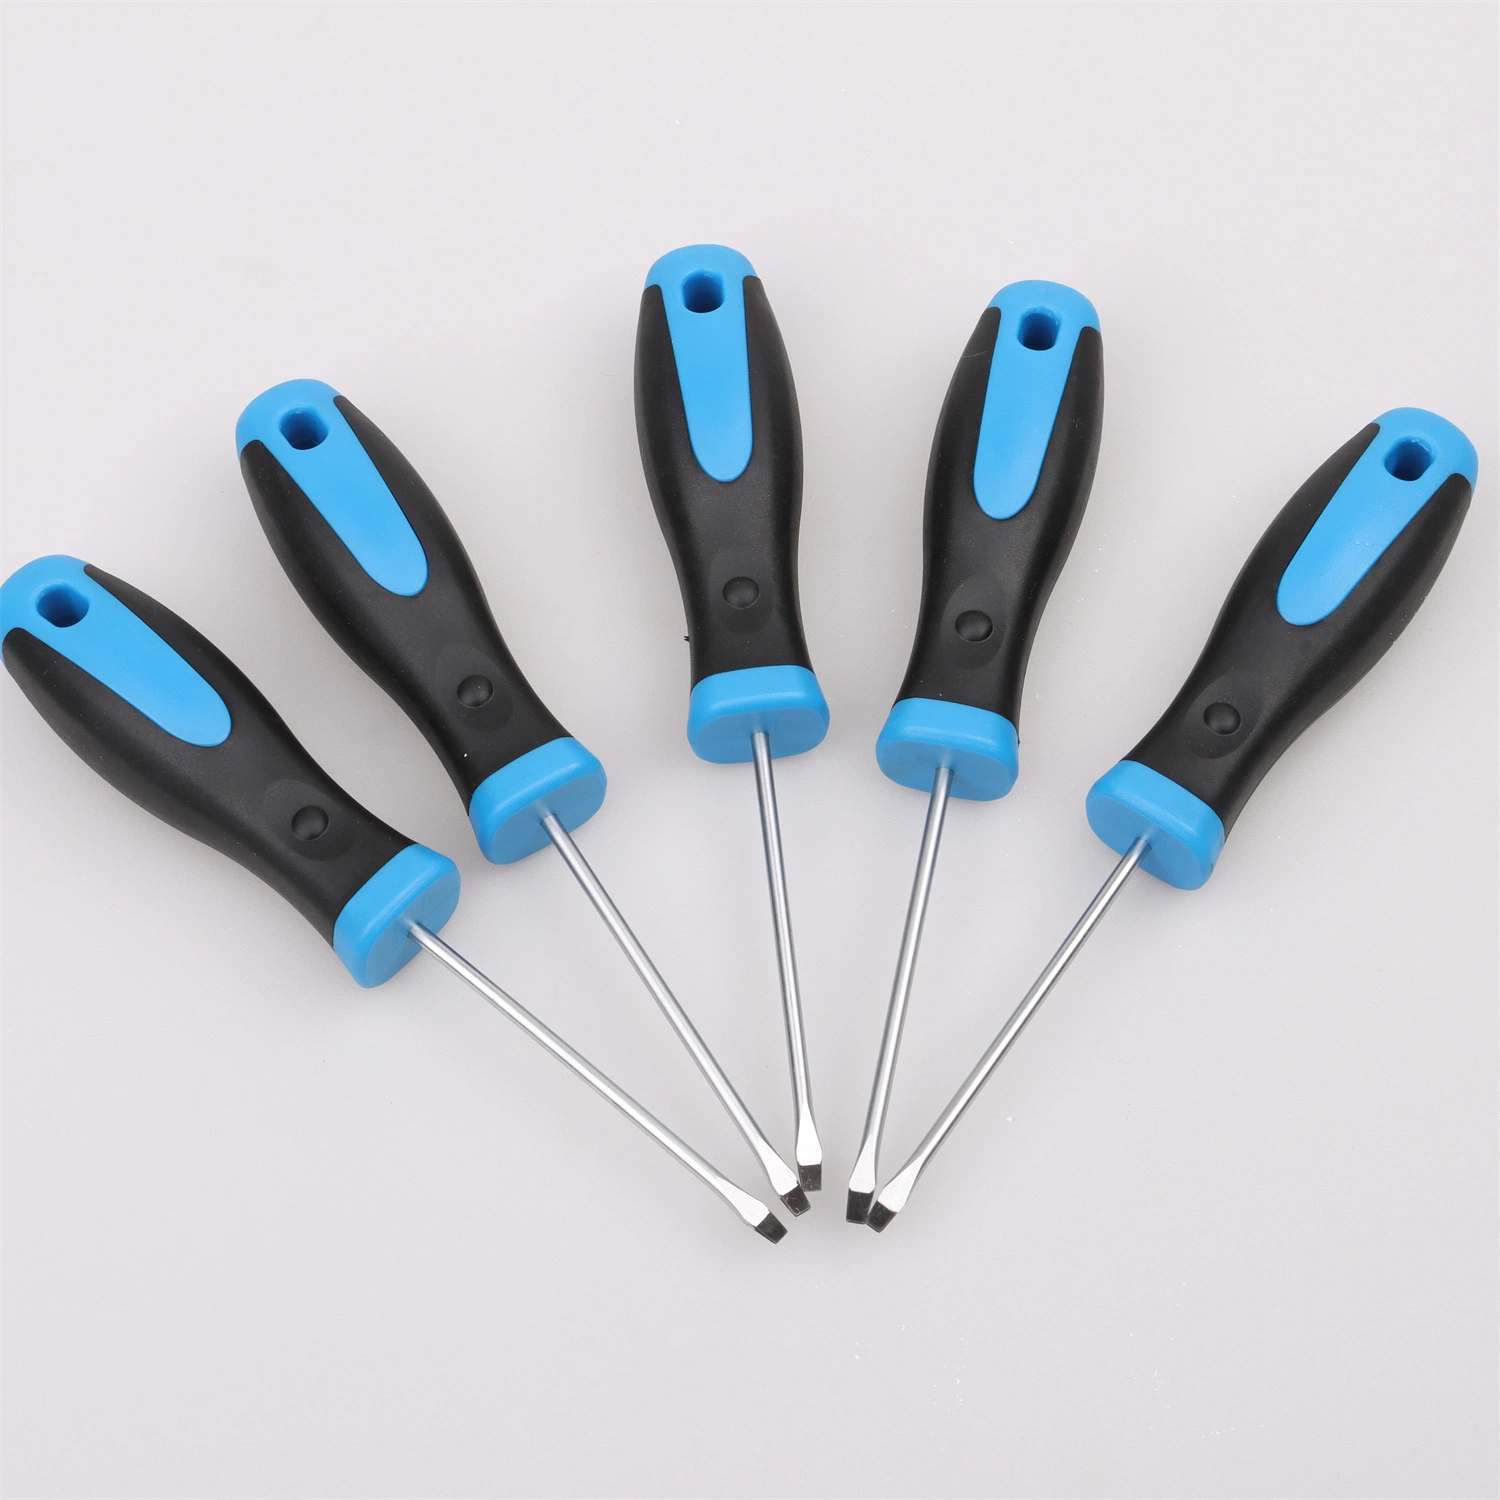 Portable Screwdriver Tool Accessories Hardware Tool for Home